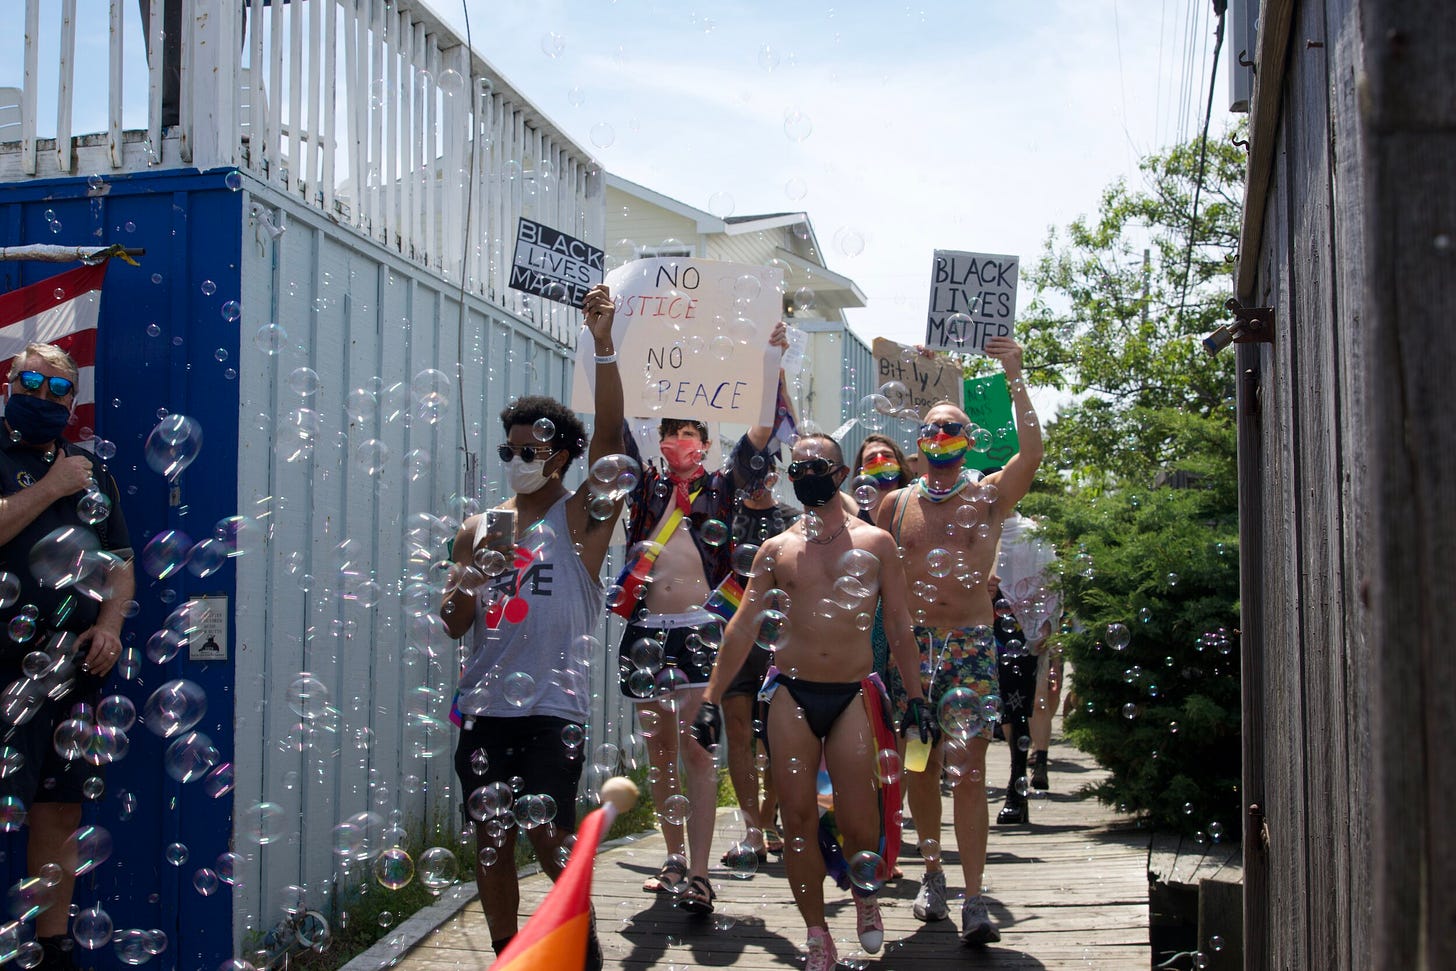 A group of diverse protesters on a wooden boardwalk, holding "Black Lives Matter" and "No Justice No Peace" signs. Many of the protesters wear colorful clothing, sunglasses, and protective face masks. A myriad of shimmering soap bubbles float around them, creating a whimsical atmosphere against the backdrop of a white and blue fence and a clear sky.